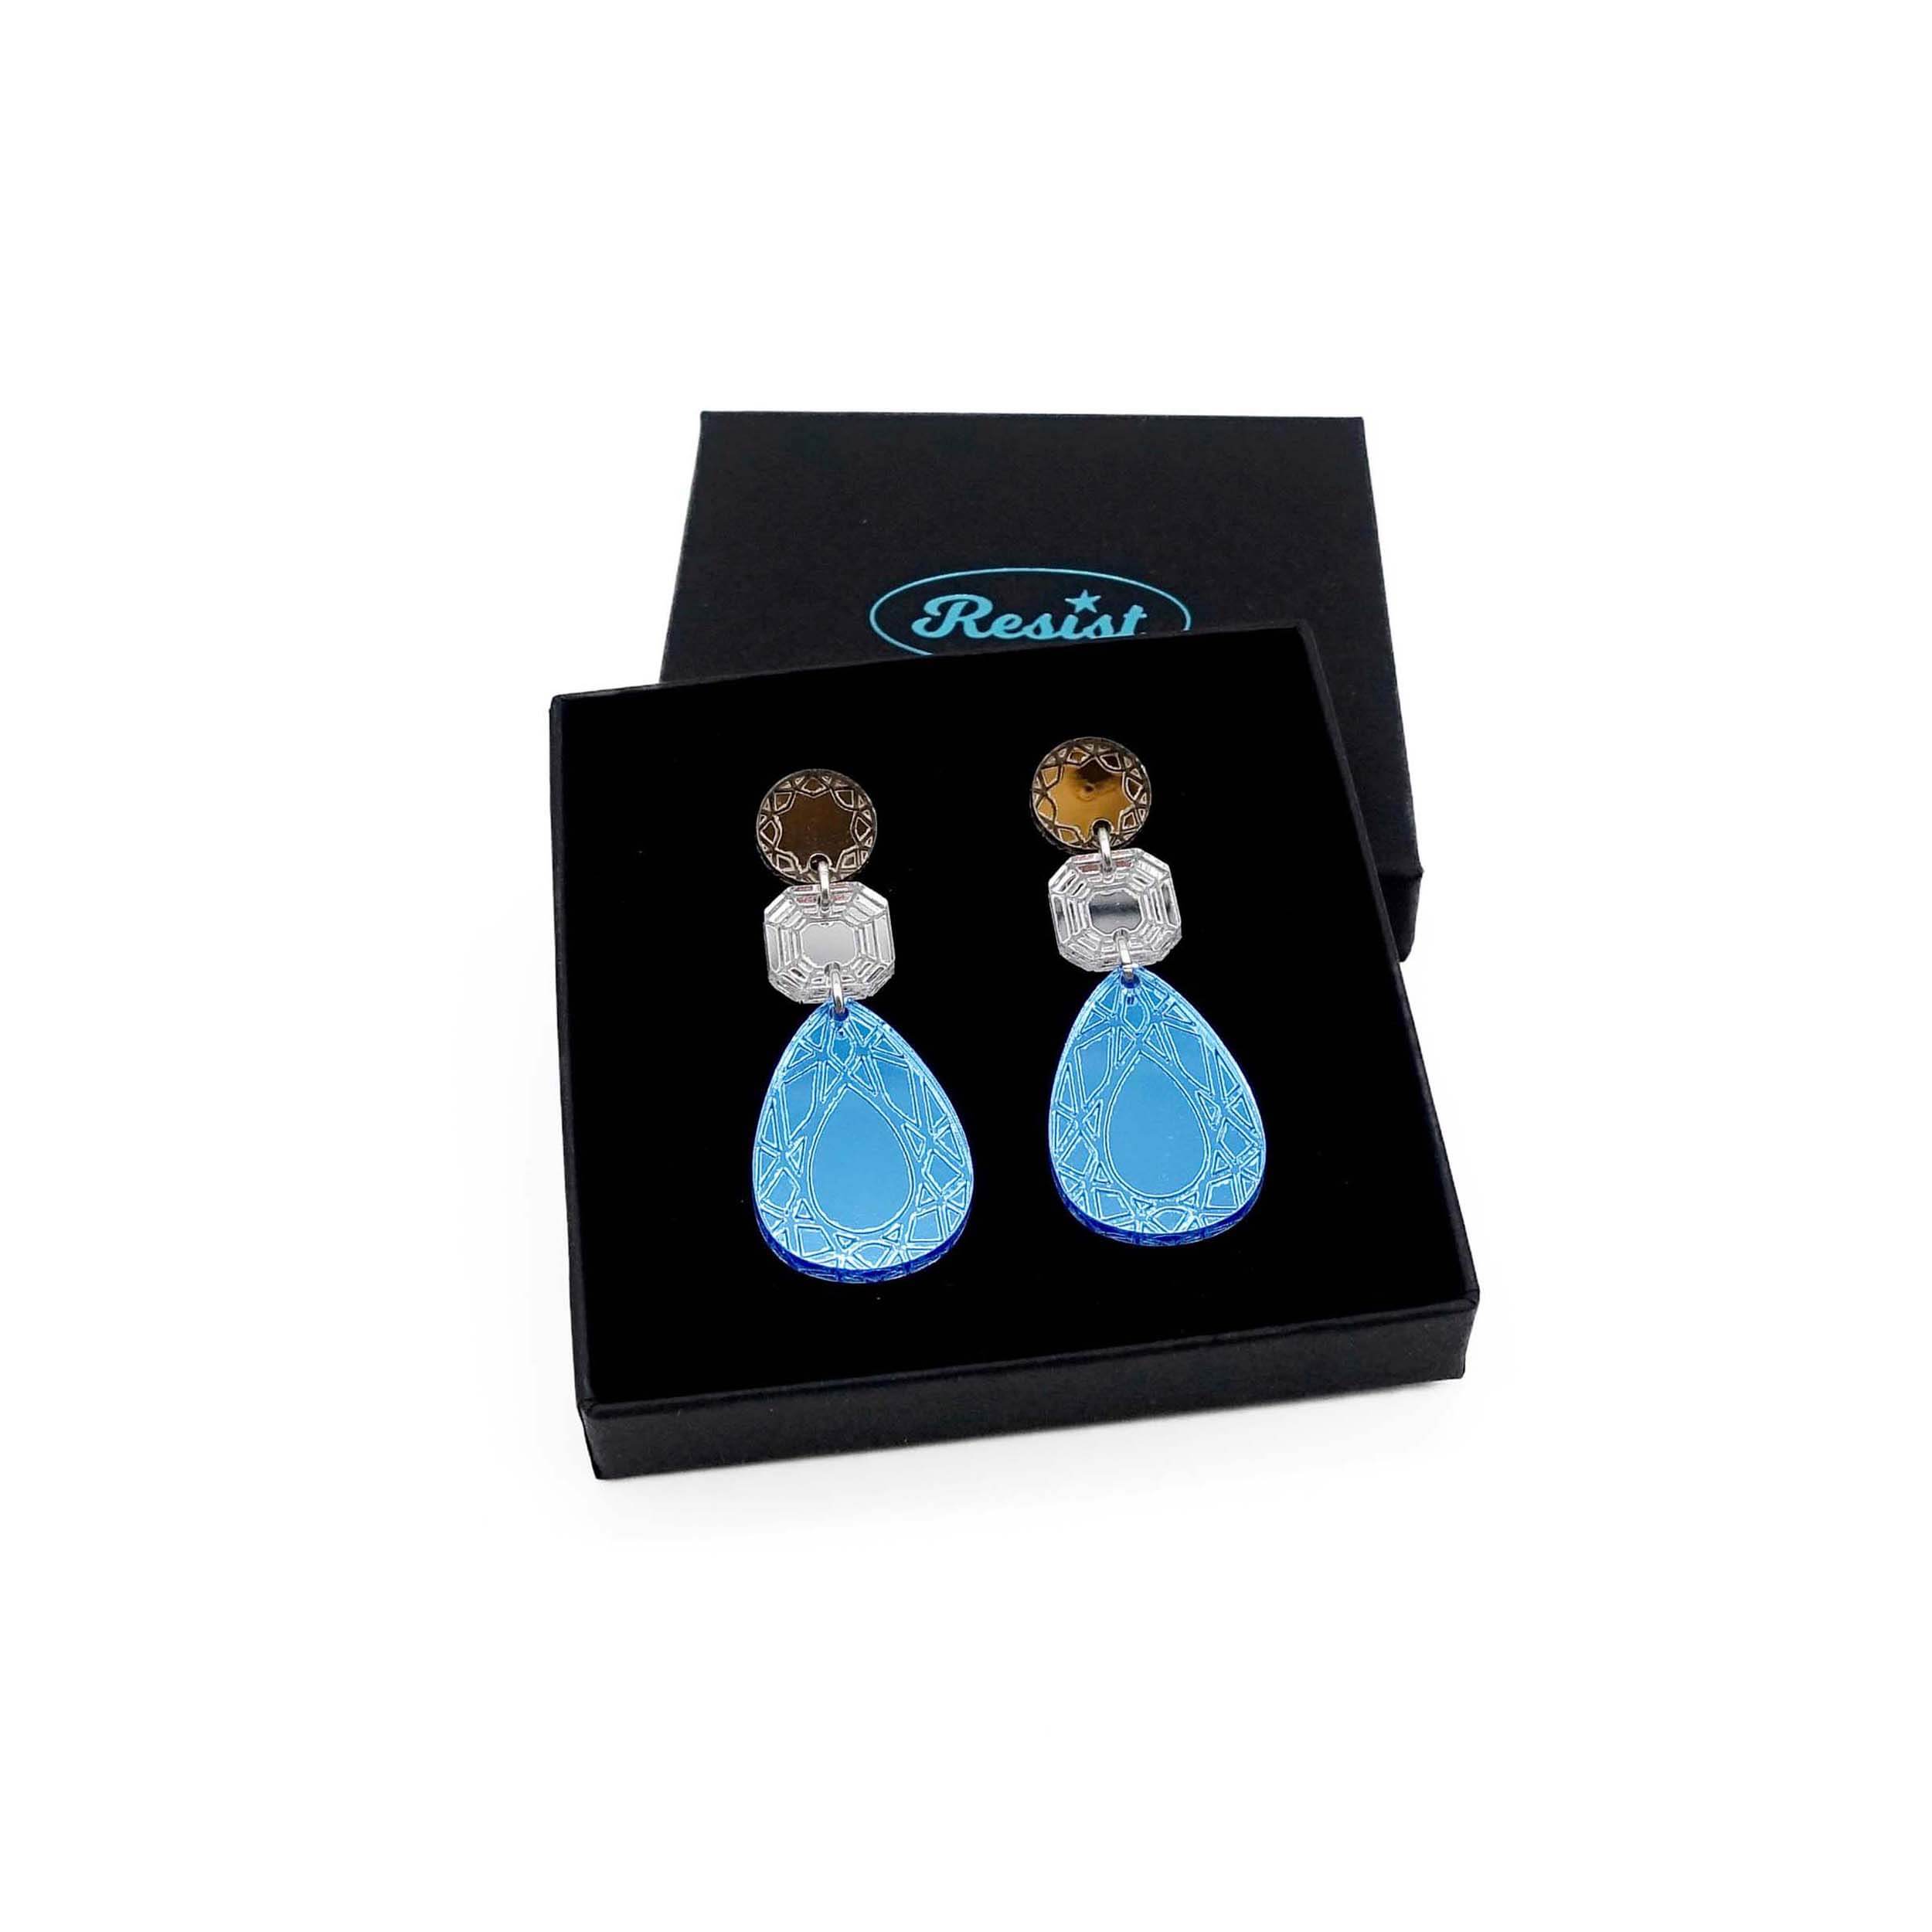 Large Belle Époque Jewel drop earrings in Cool Sky: sky blue, silver and bronze colours shown in a Wear and Resist gift box. 